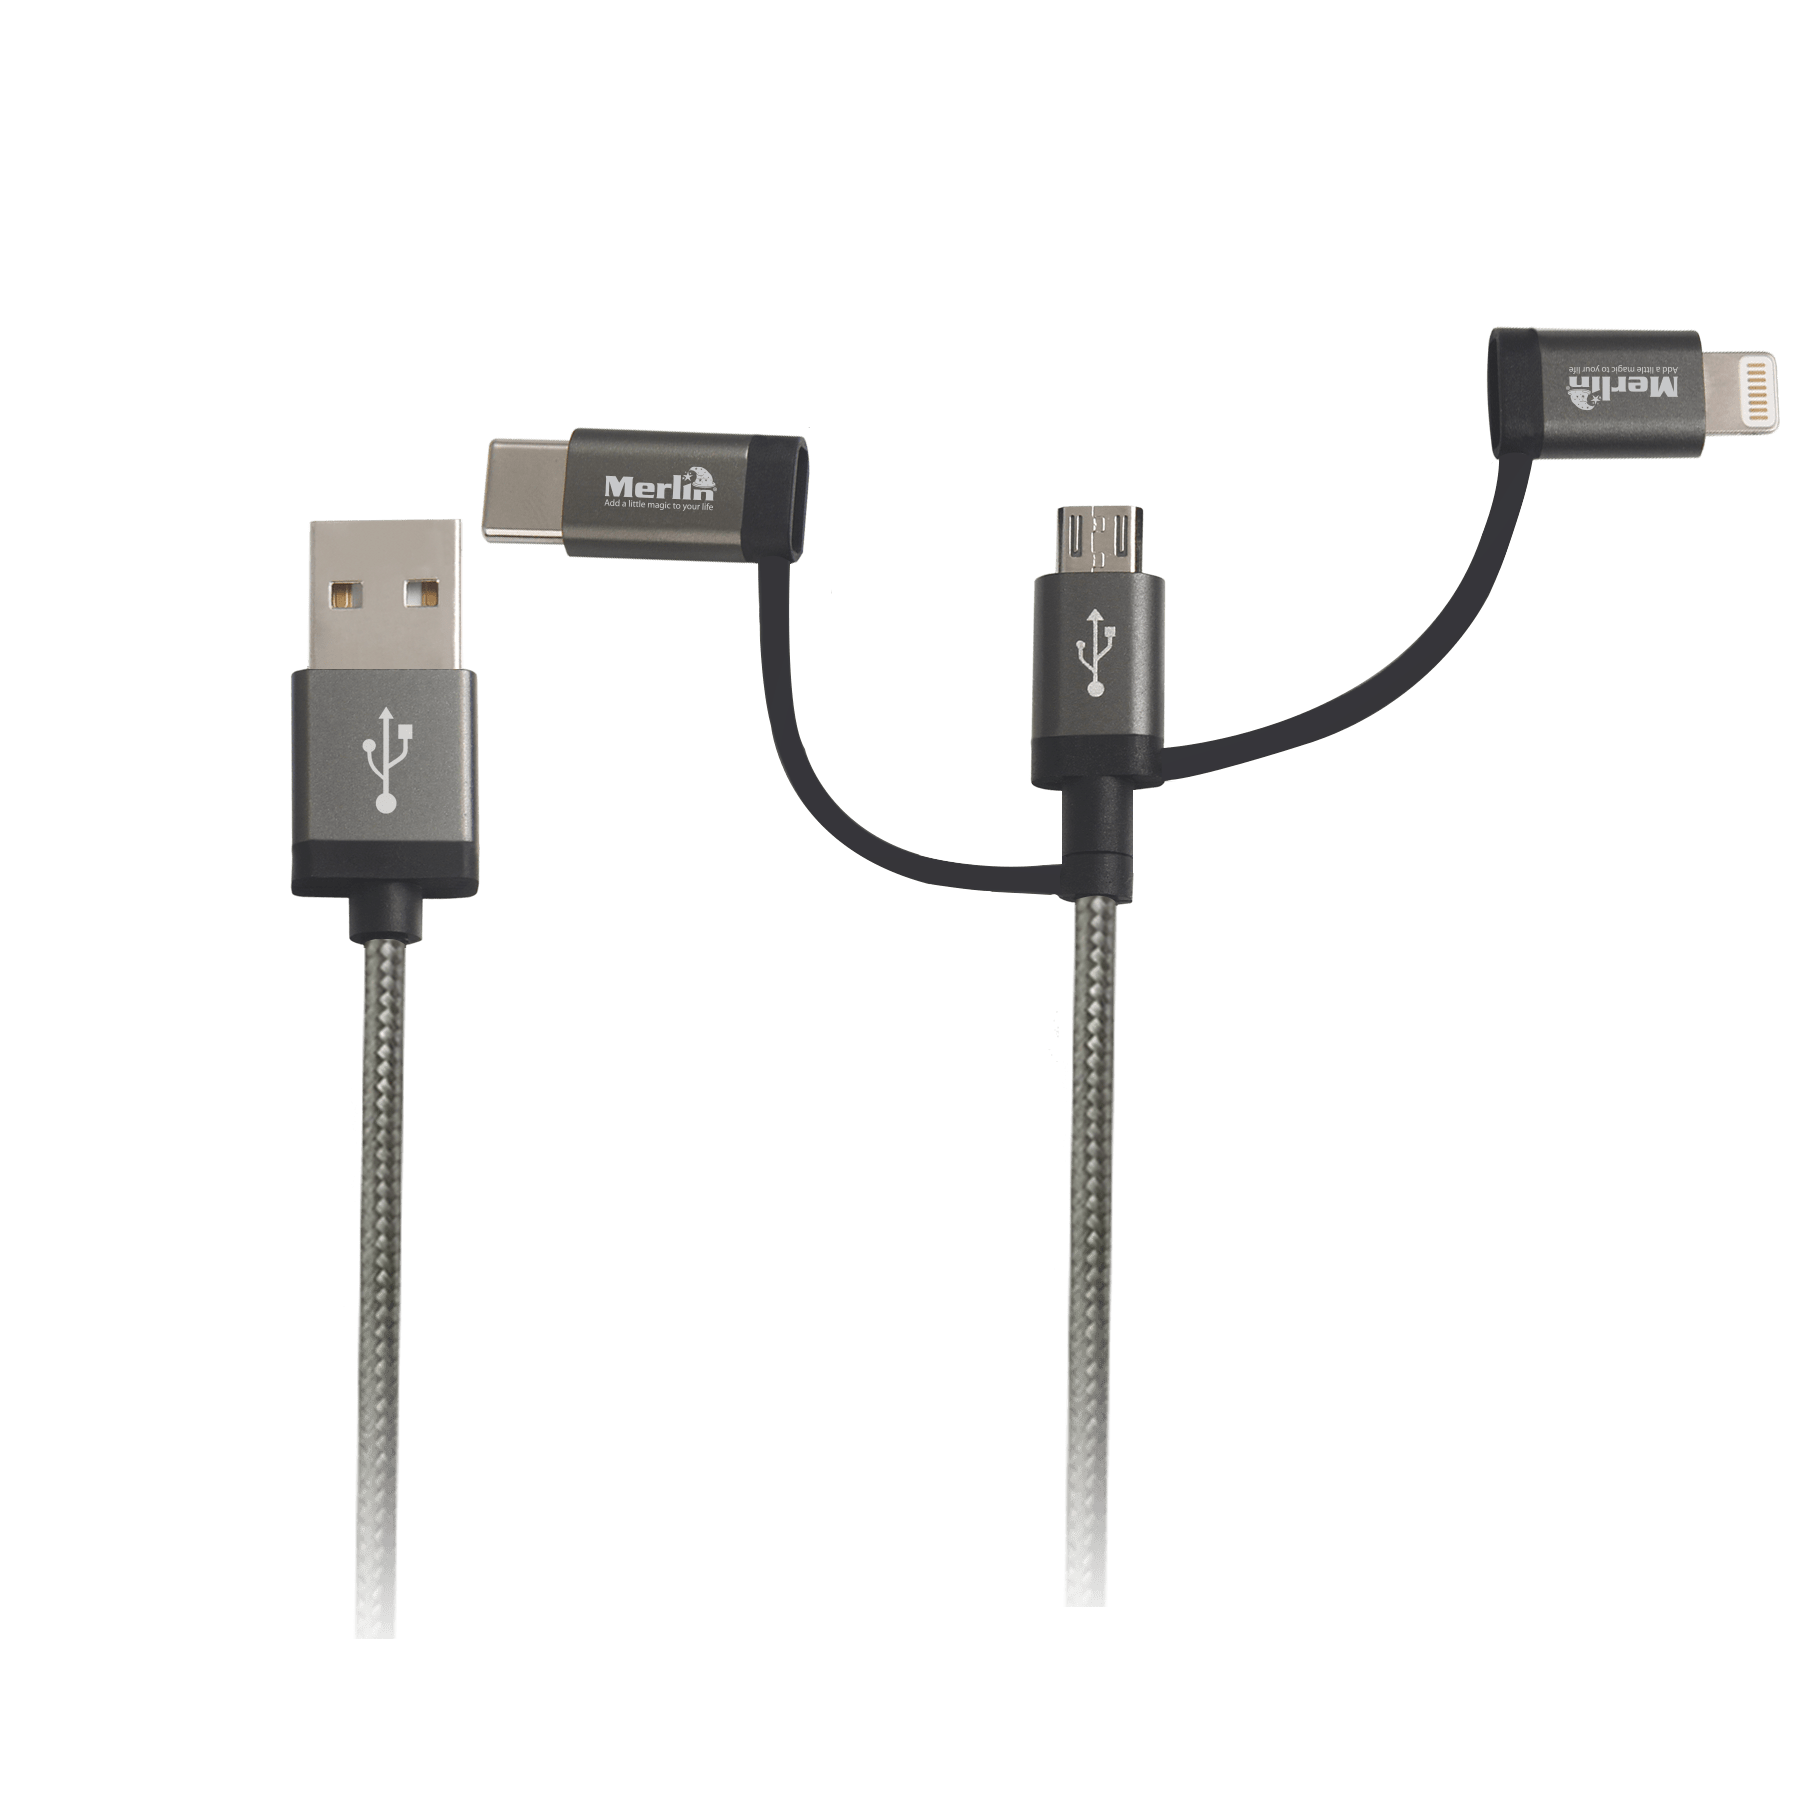 Merlin 547621 3N1 CHARGE CABLE PREMIUM EDITION